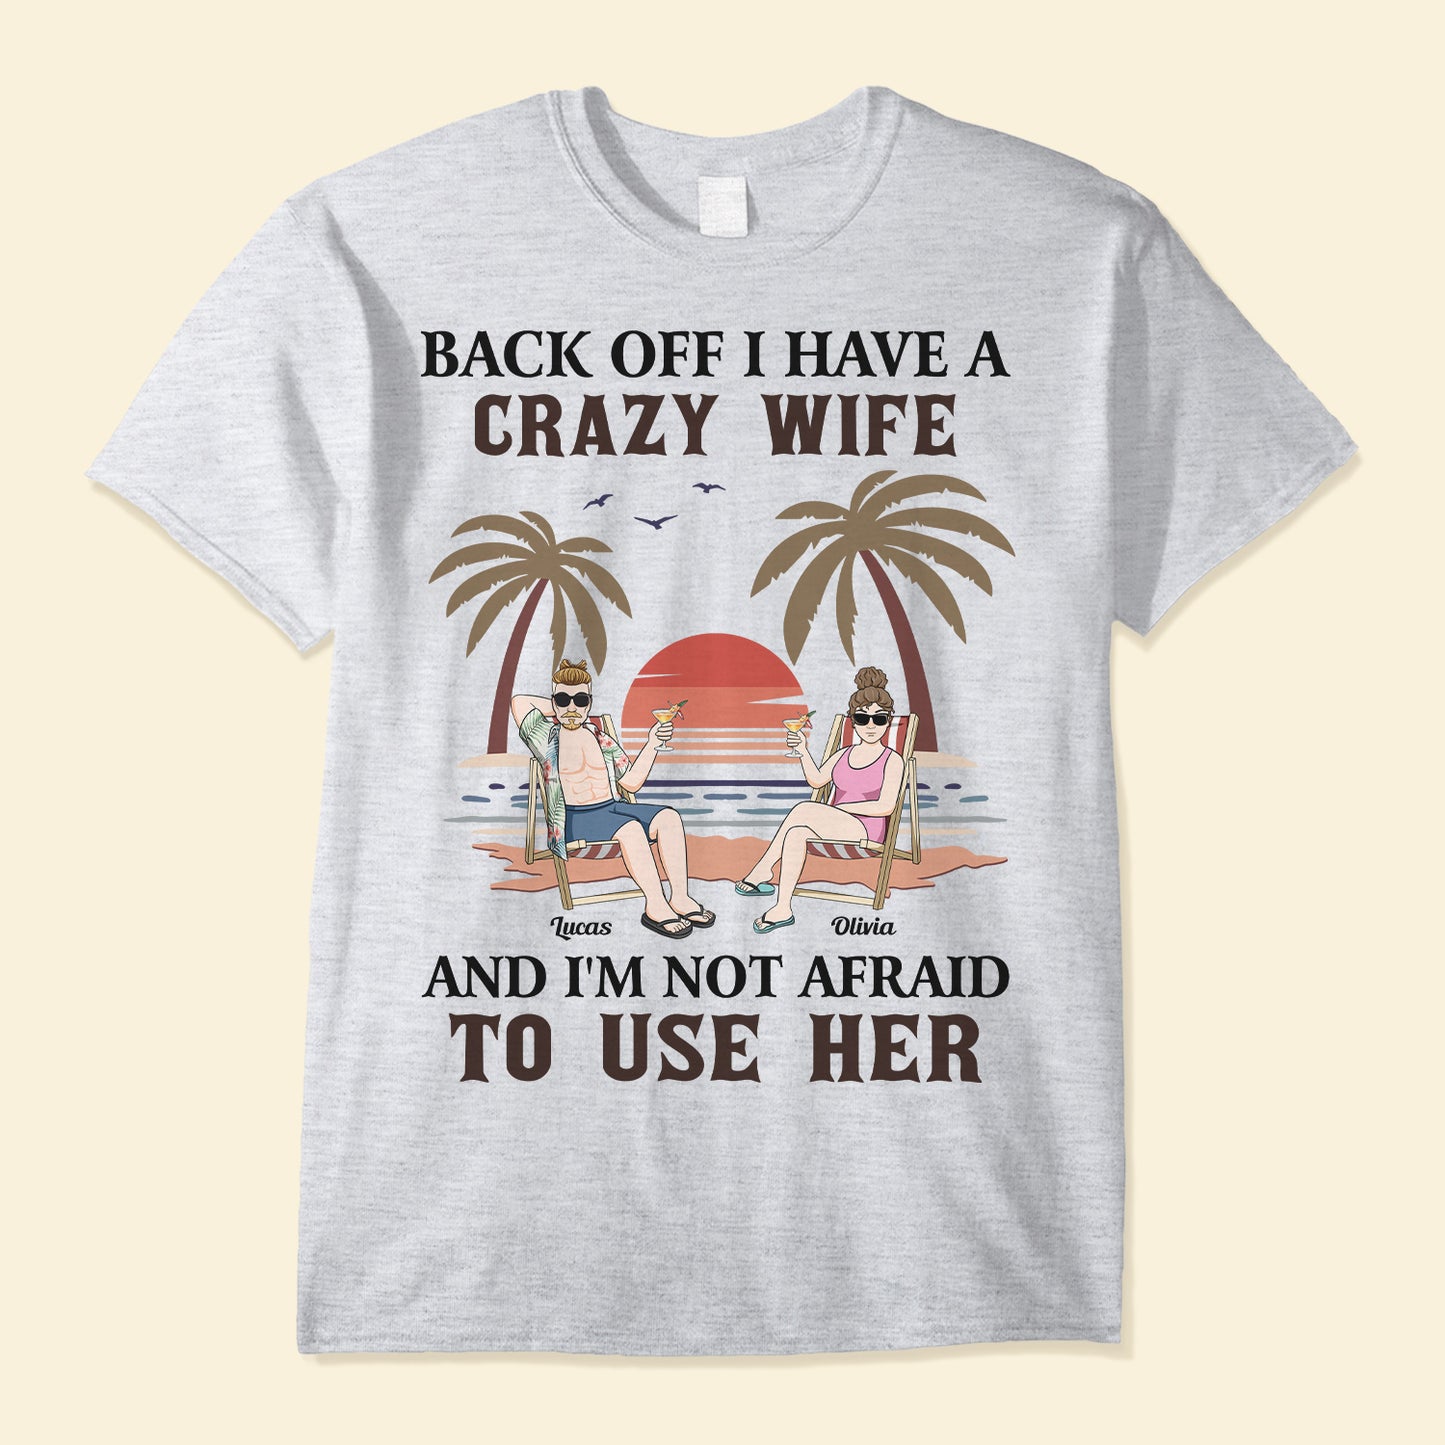 Back Off I Have A Crazy Wife - Personalized Shirt - Funny Birthday Gift For Husband, Dad - Gift From Daughters, Sons, Wife